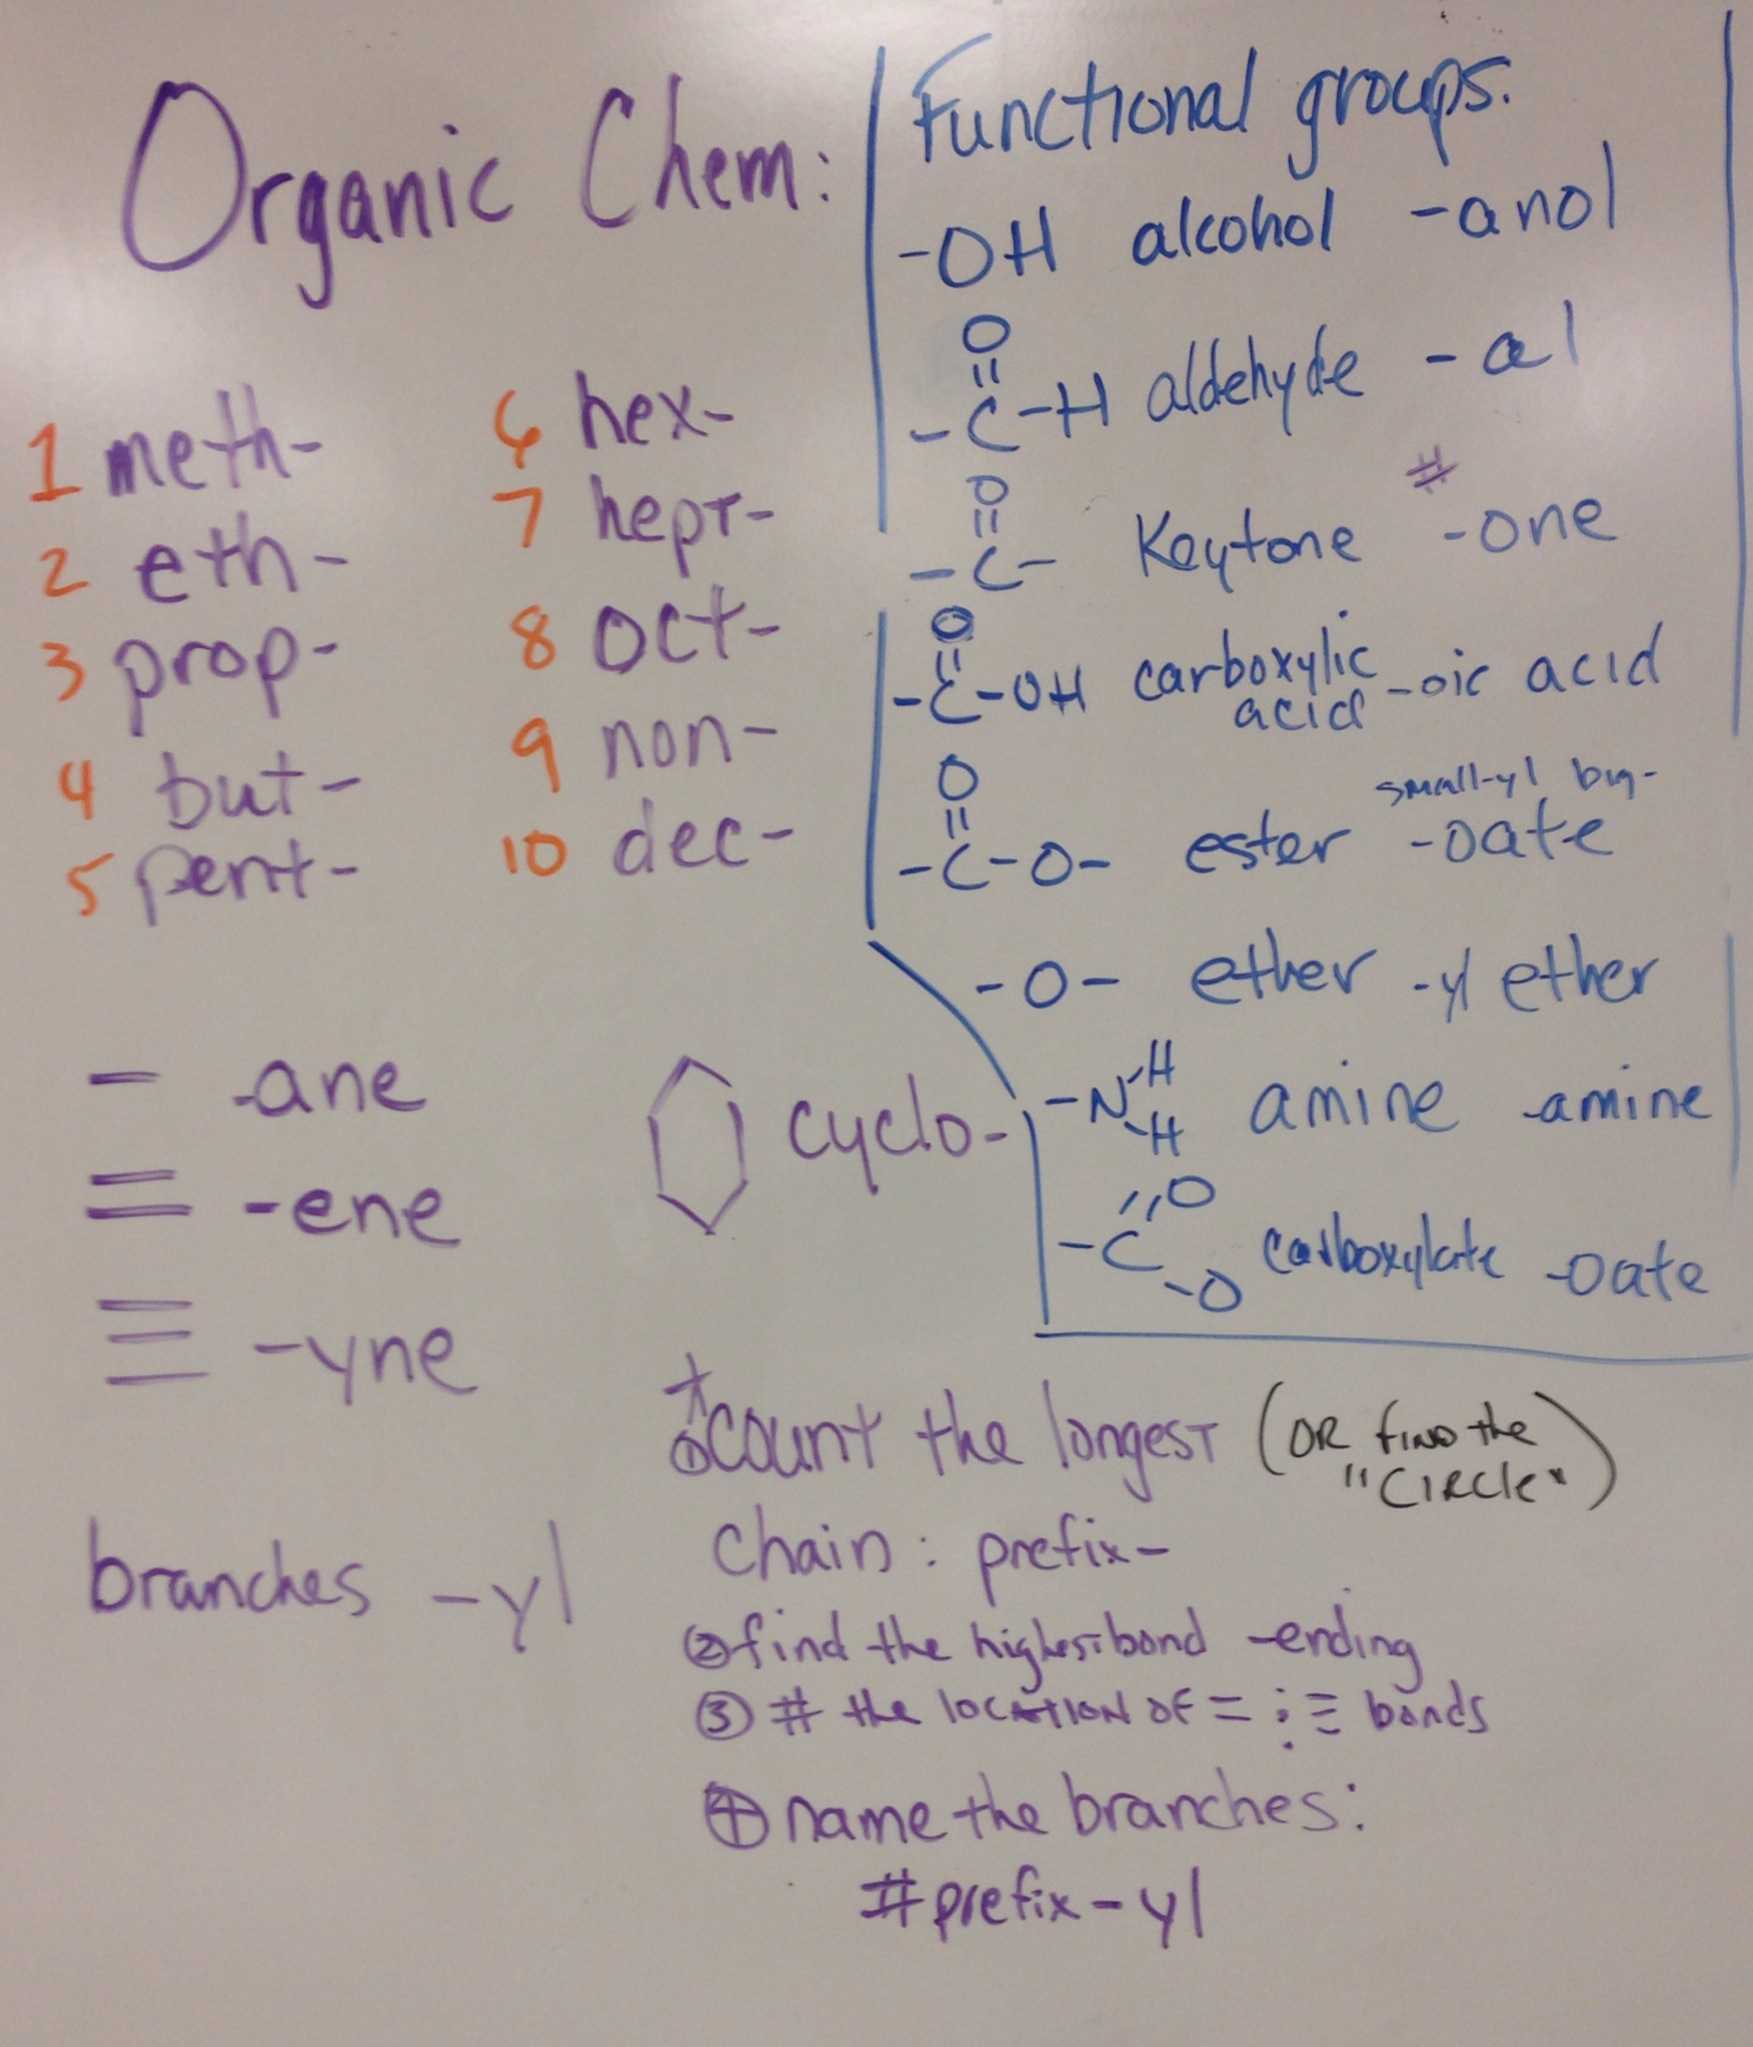 Nomenclature Worksheet 1 together with organic Chemistry Nomenclature Chart Pin organic Functional Groups